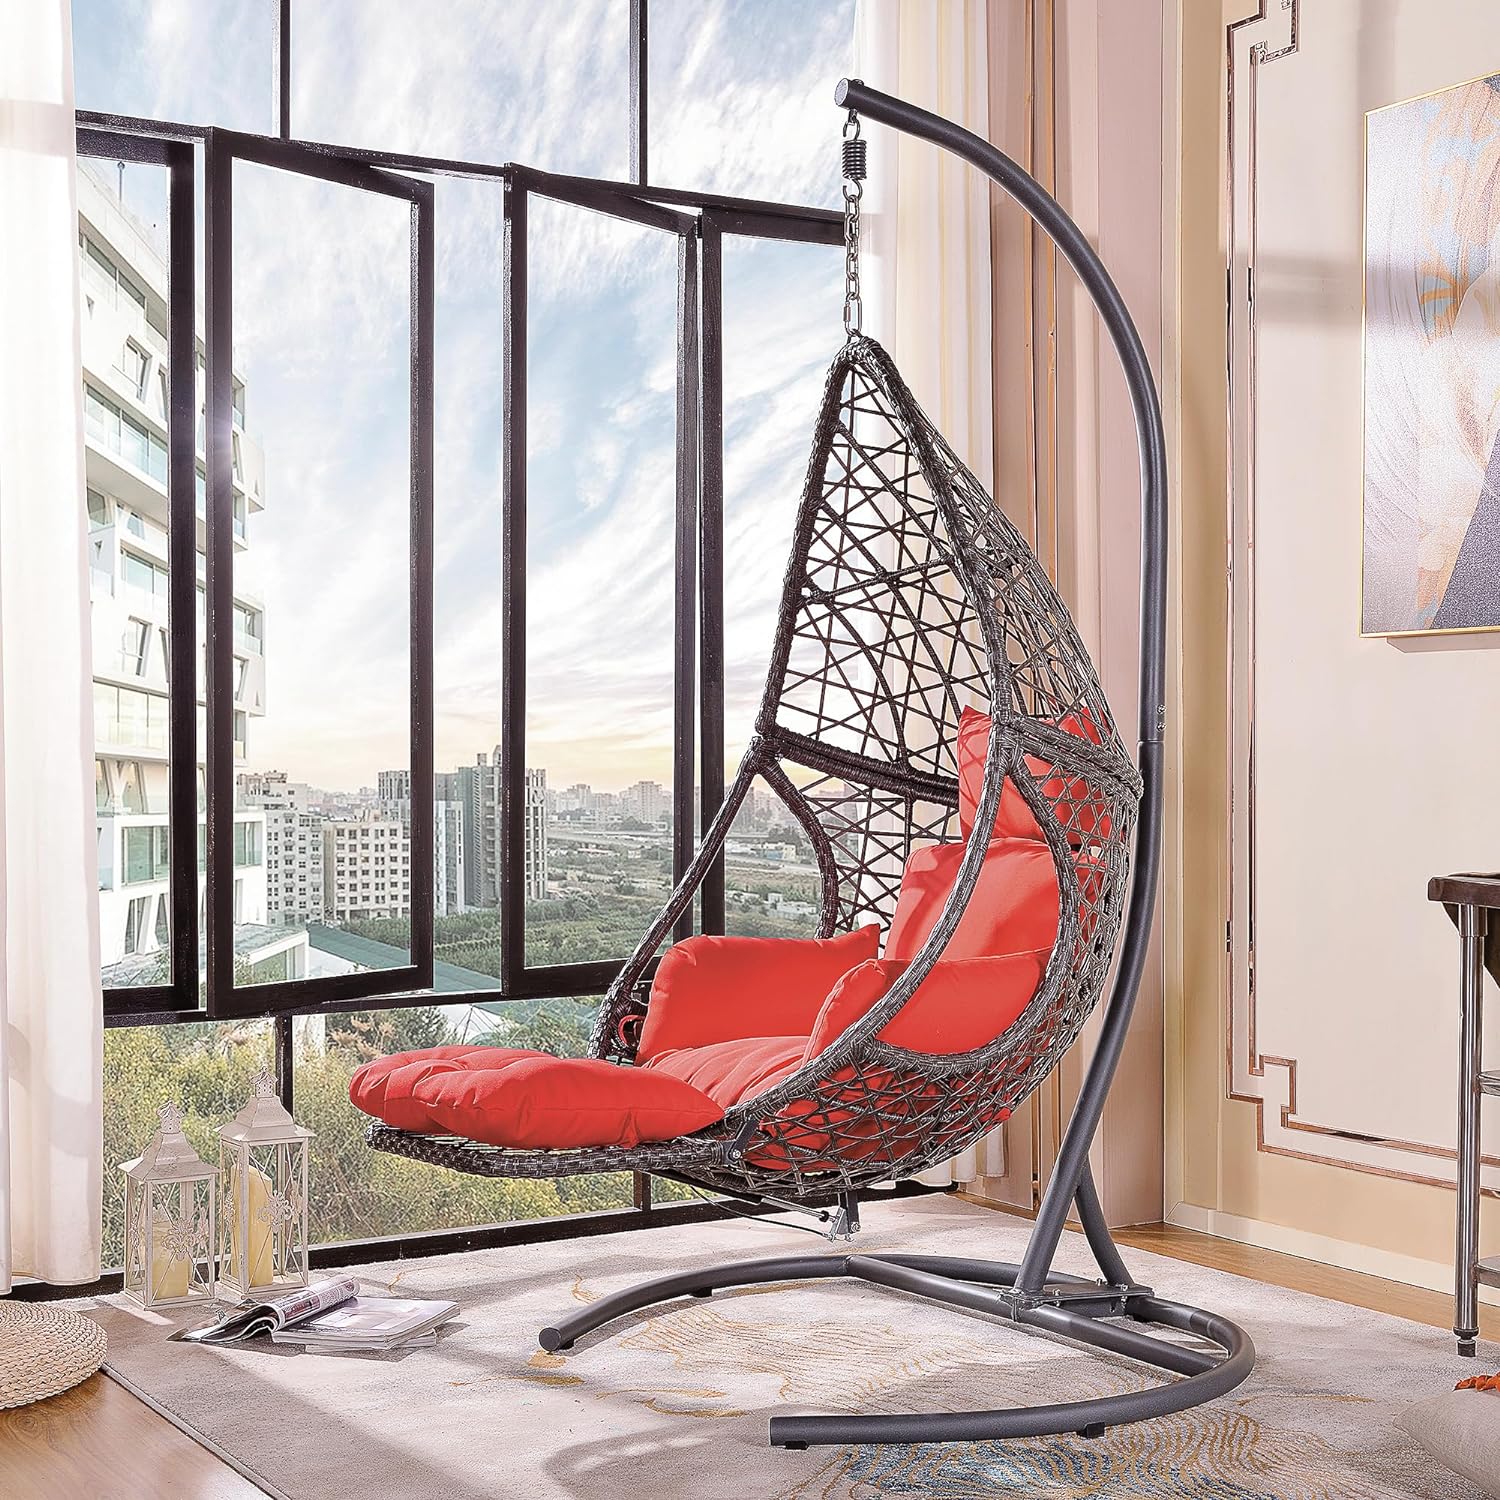 

Egg Chair Cozy Hanging Swing Chair Set: Wicker Rattan Basket Chair With Arc Stand - Indoor & Outdoor Freestanding Moon Hammock Chair With Cushion, Perfect For Patio, Porch, Or Balcony